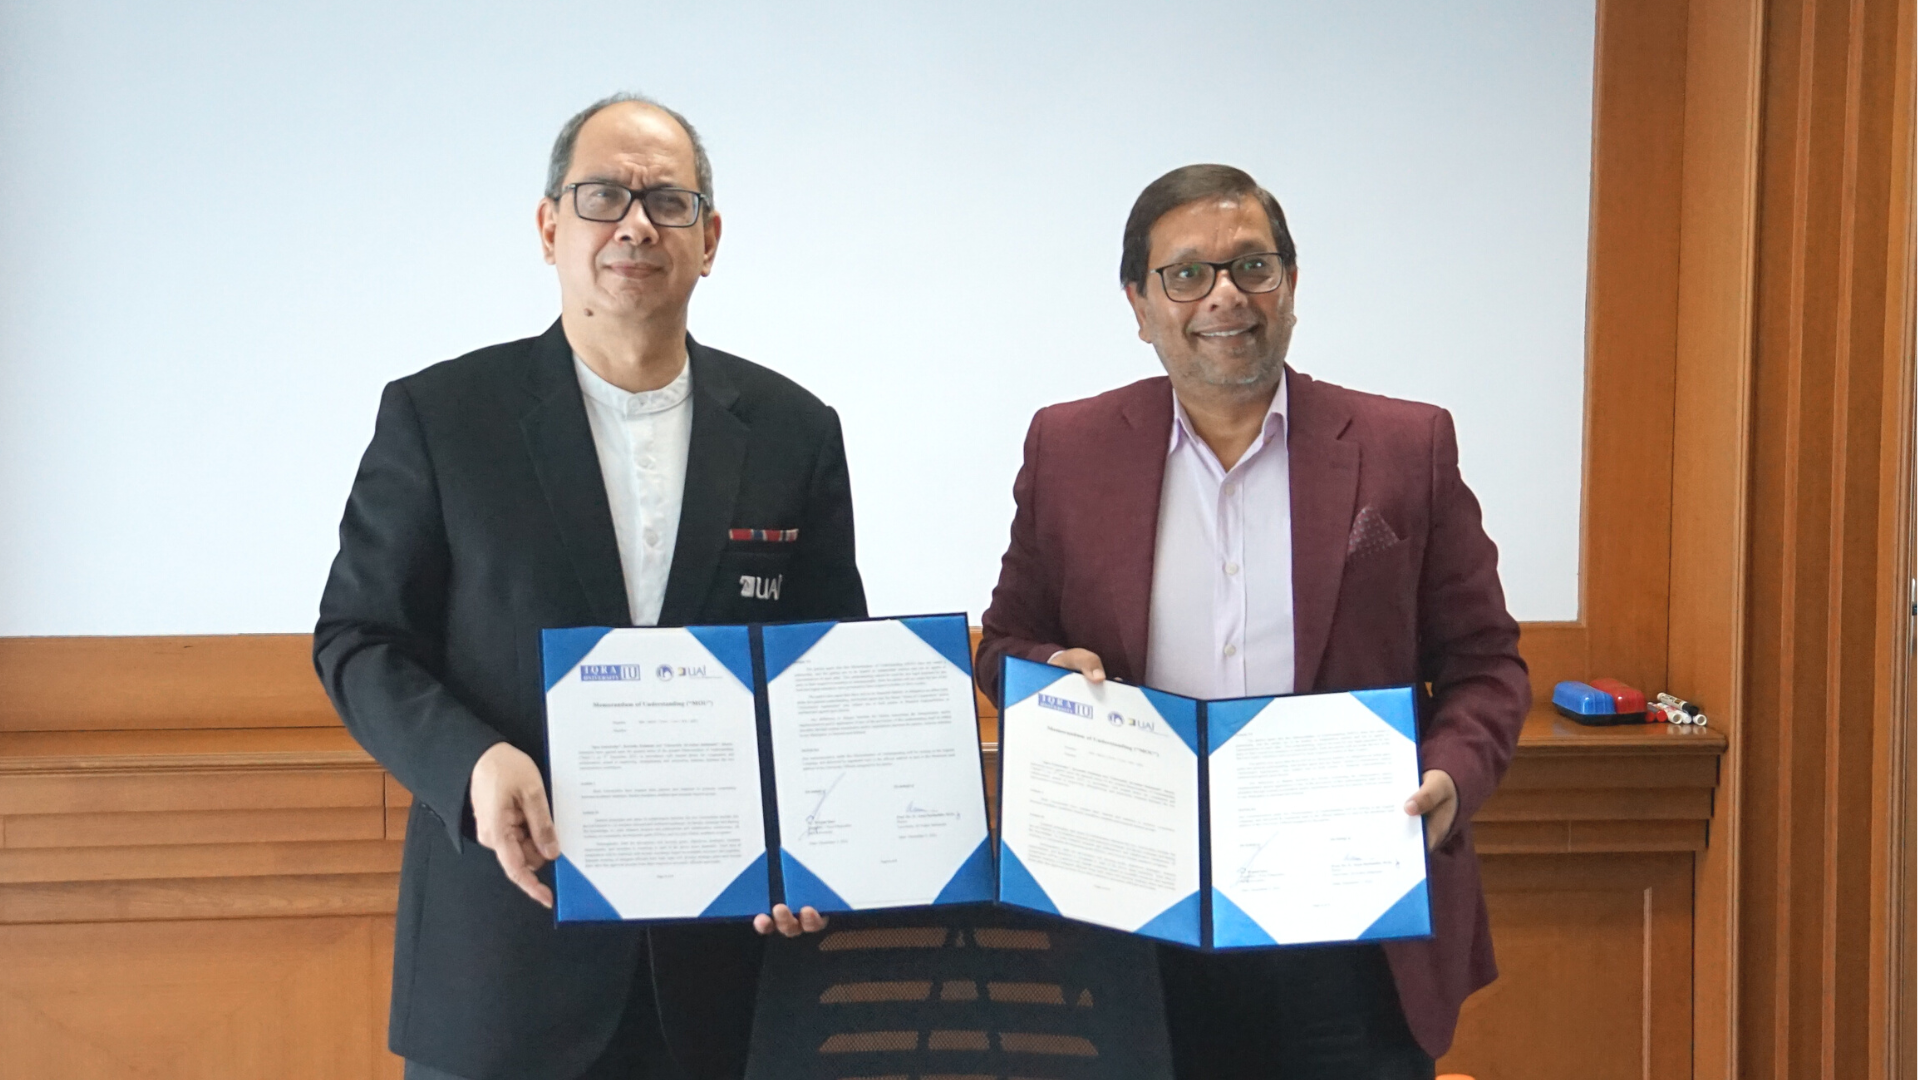 Leading Sciences to Improve the Quality of Education and Research, IU and UAI Collaborated through MoU